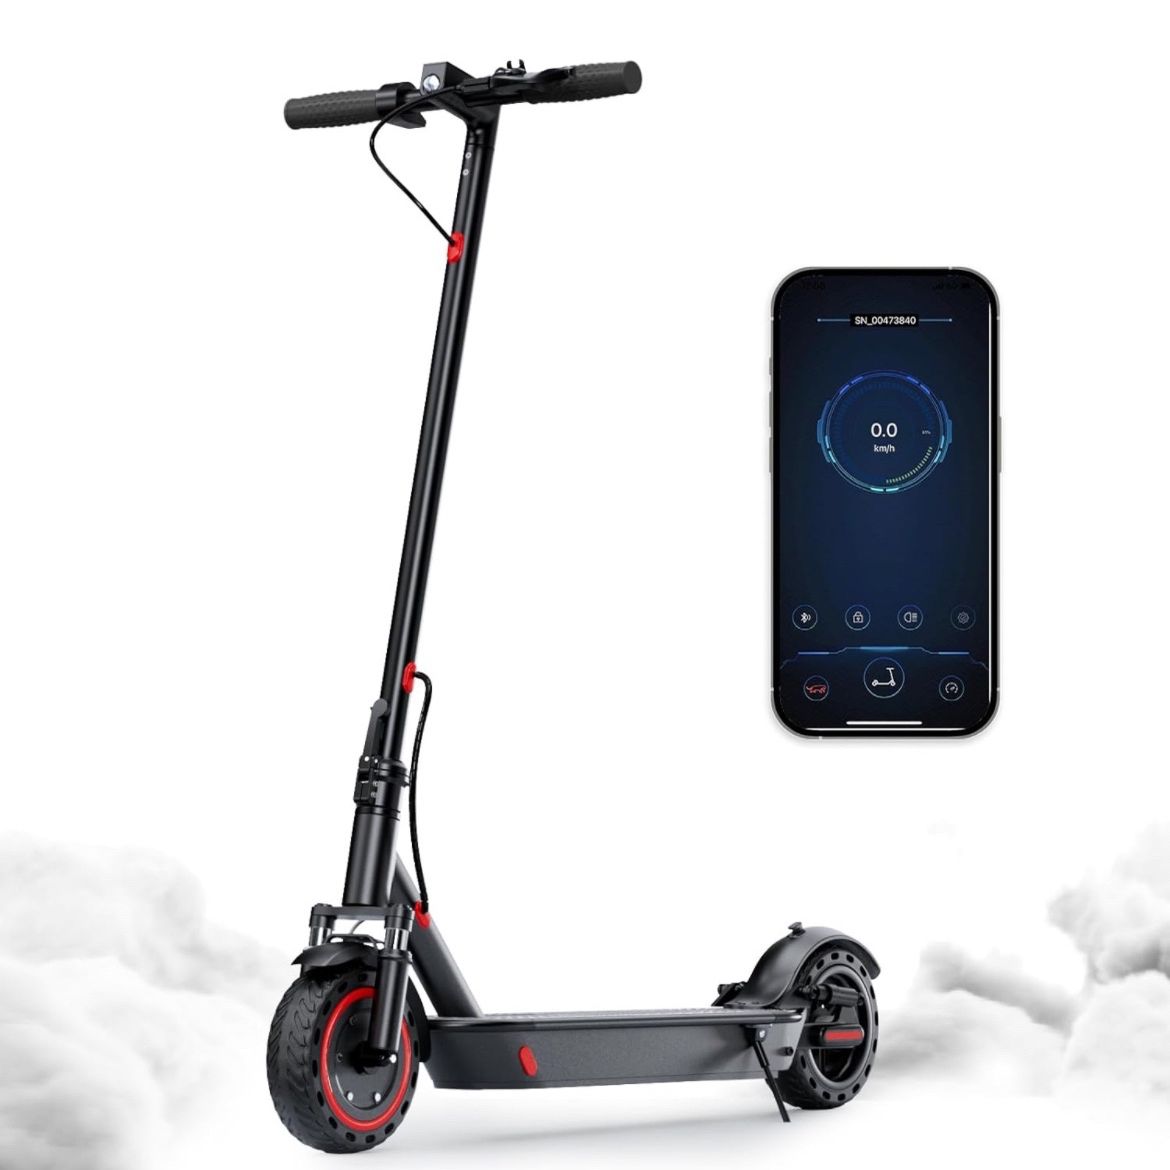 Aovowheel Electric Scooter - 8.5" Solid Tires, Quadruple Shock Absorption, Up to 19 Miles Long-Range, 19 Mph Top Speed, Portable Folding Commuting Sco